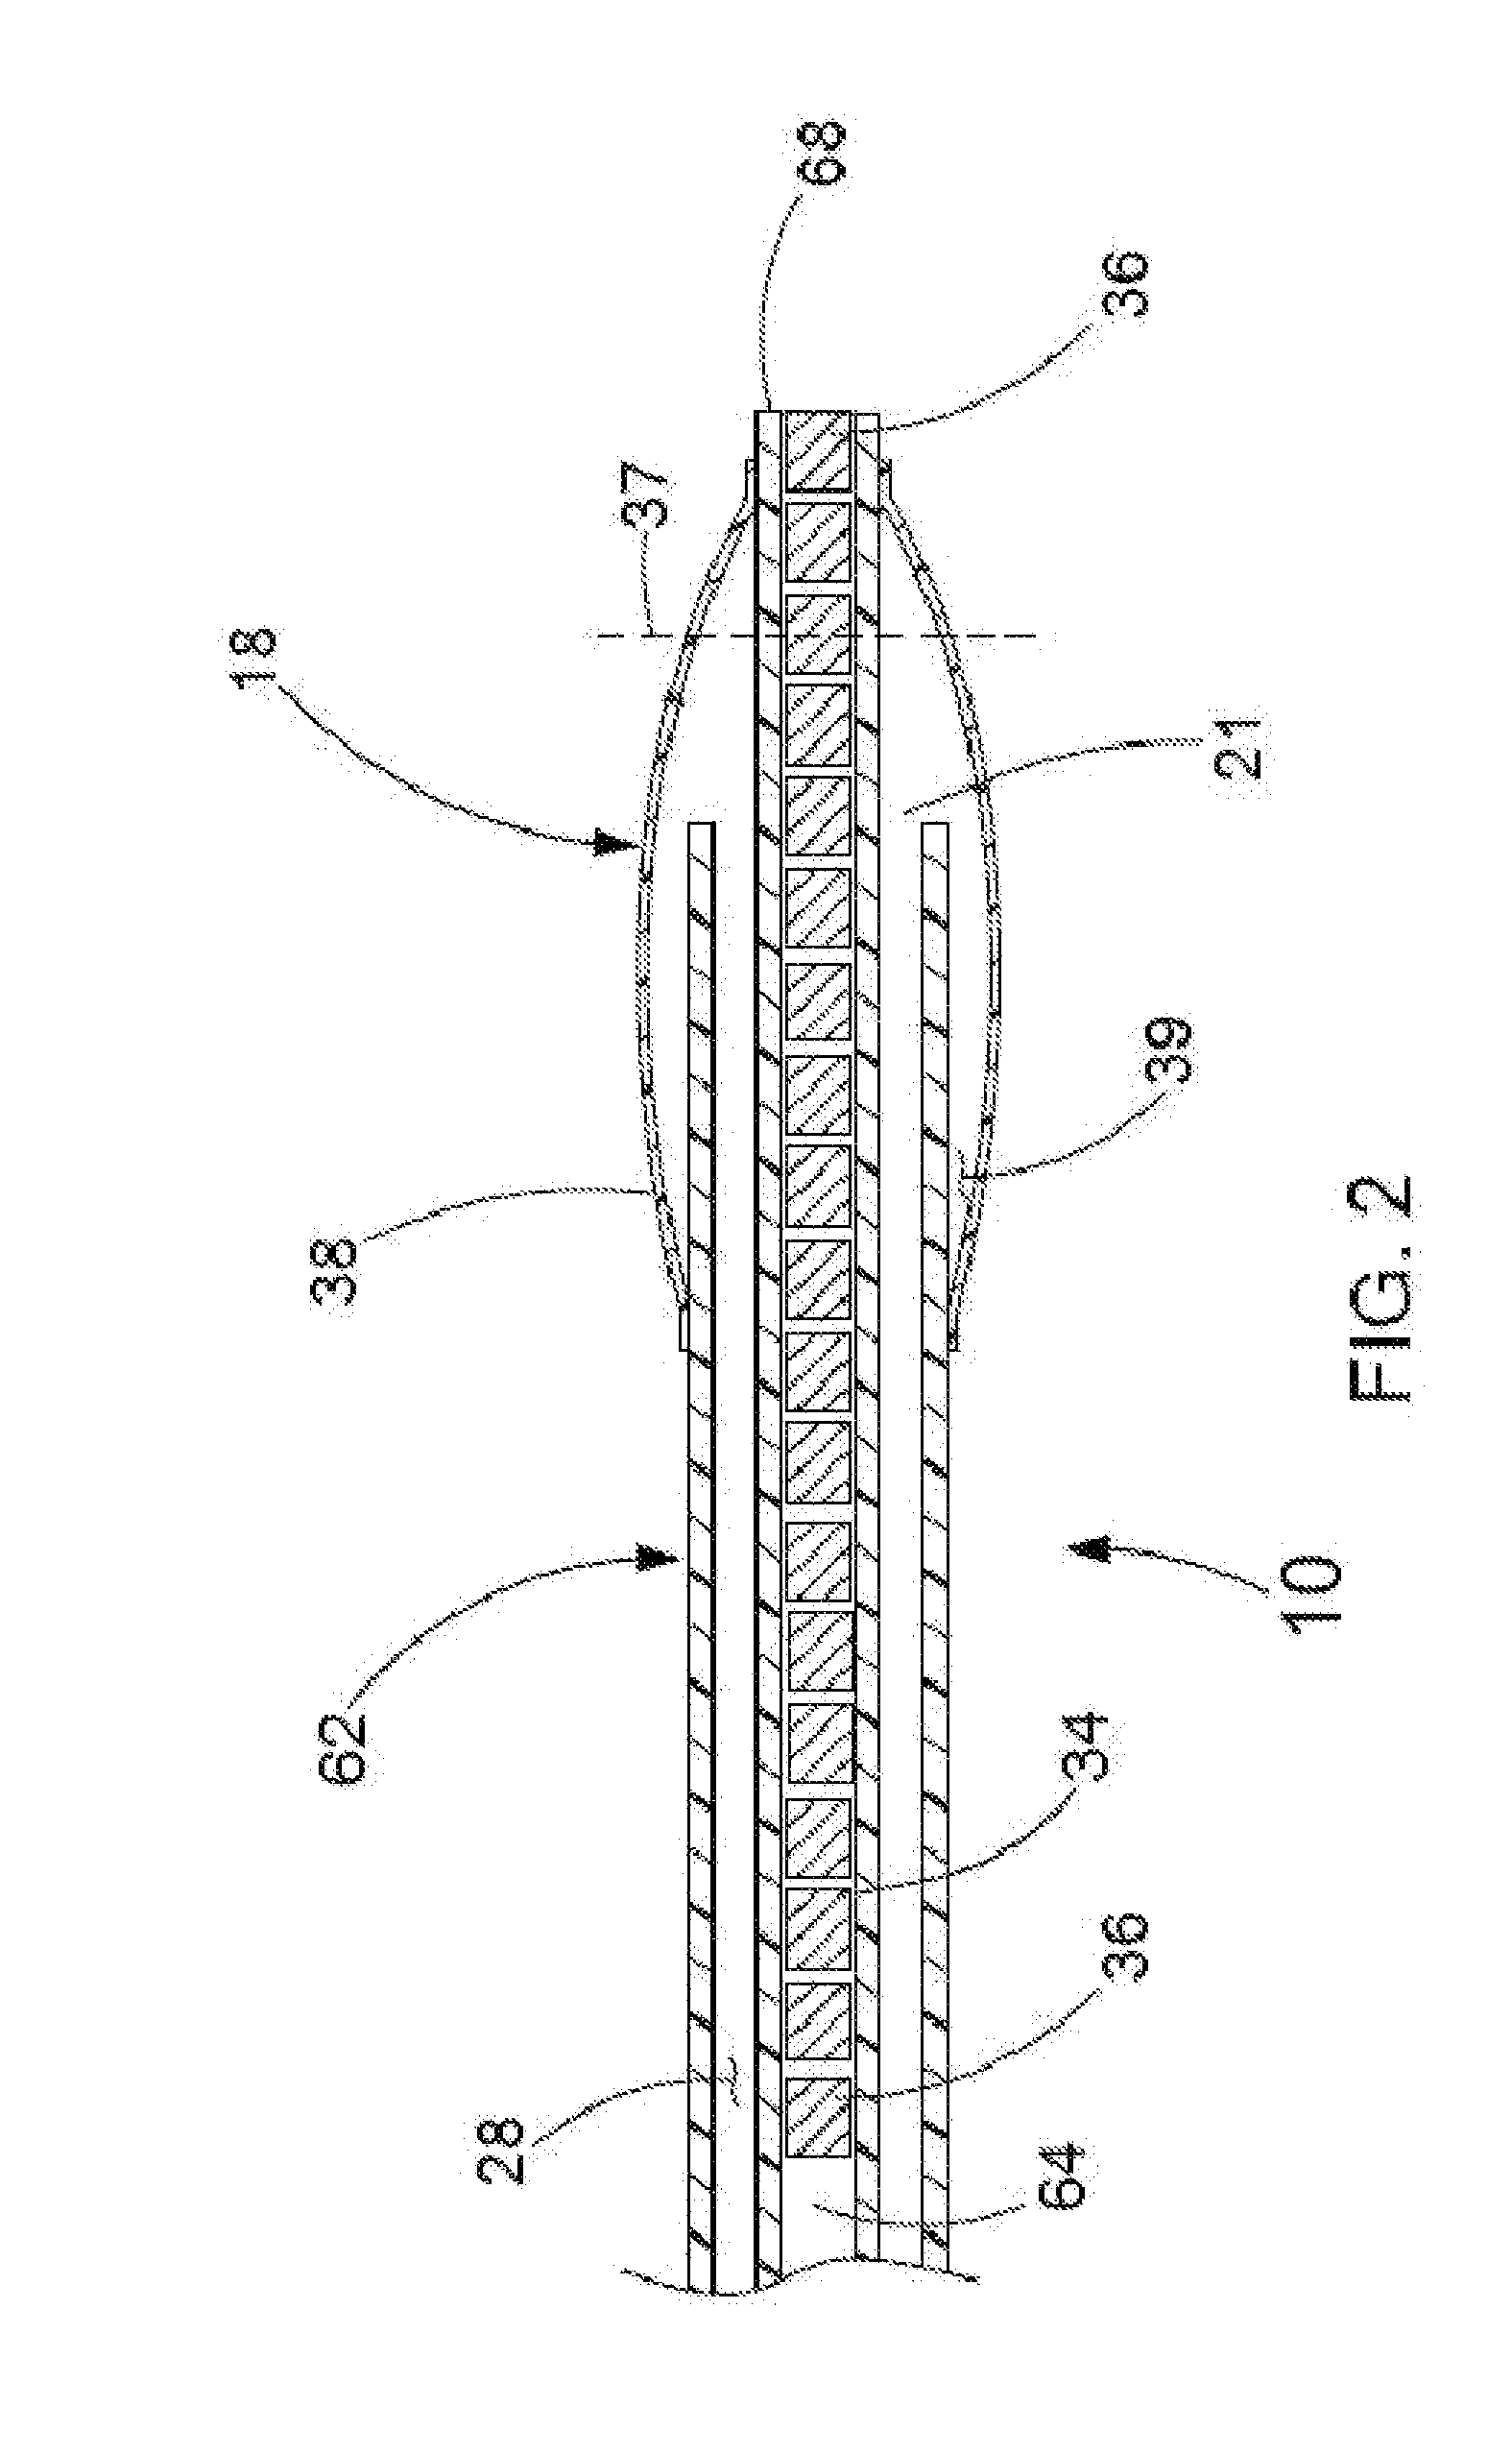 Occlusion device